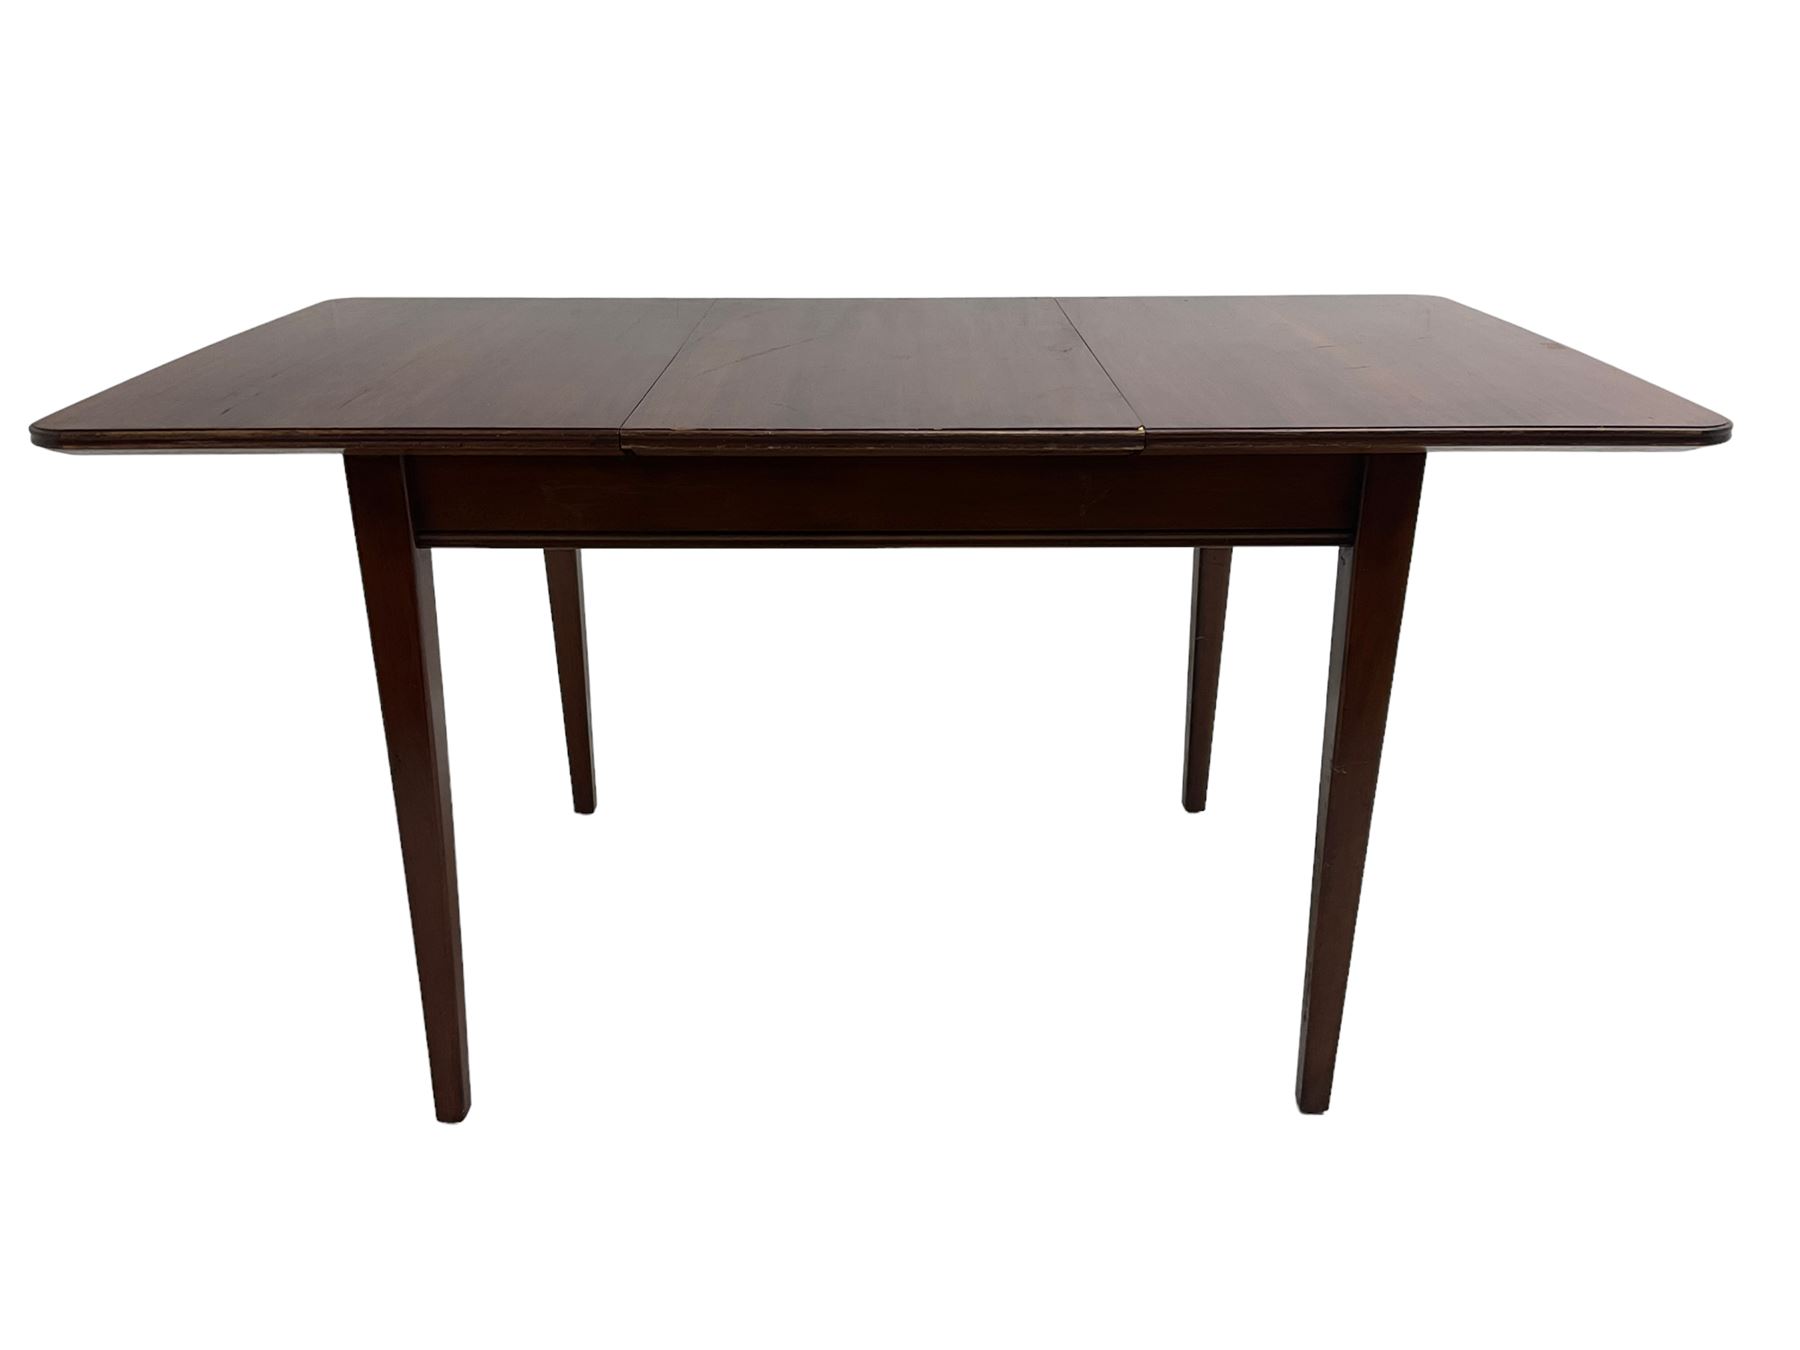 Russell of Broadway - mid-20th century teak extending dining table with square tapering supports